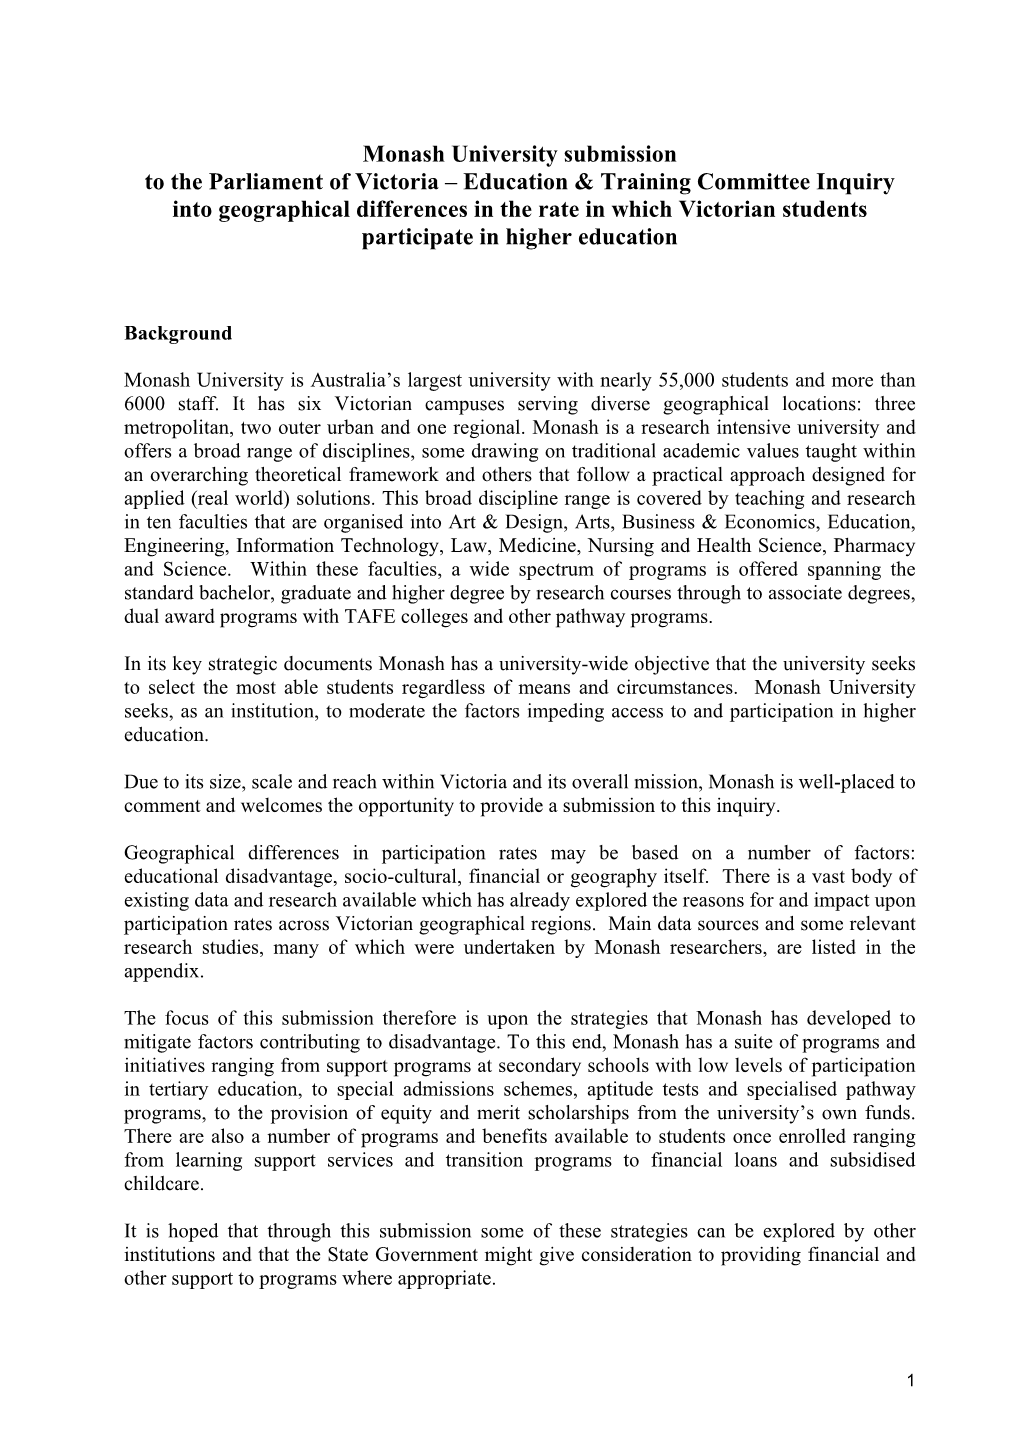 Monash University Submission to the Parliament of Victoria – Education